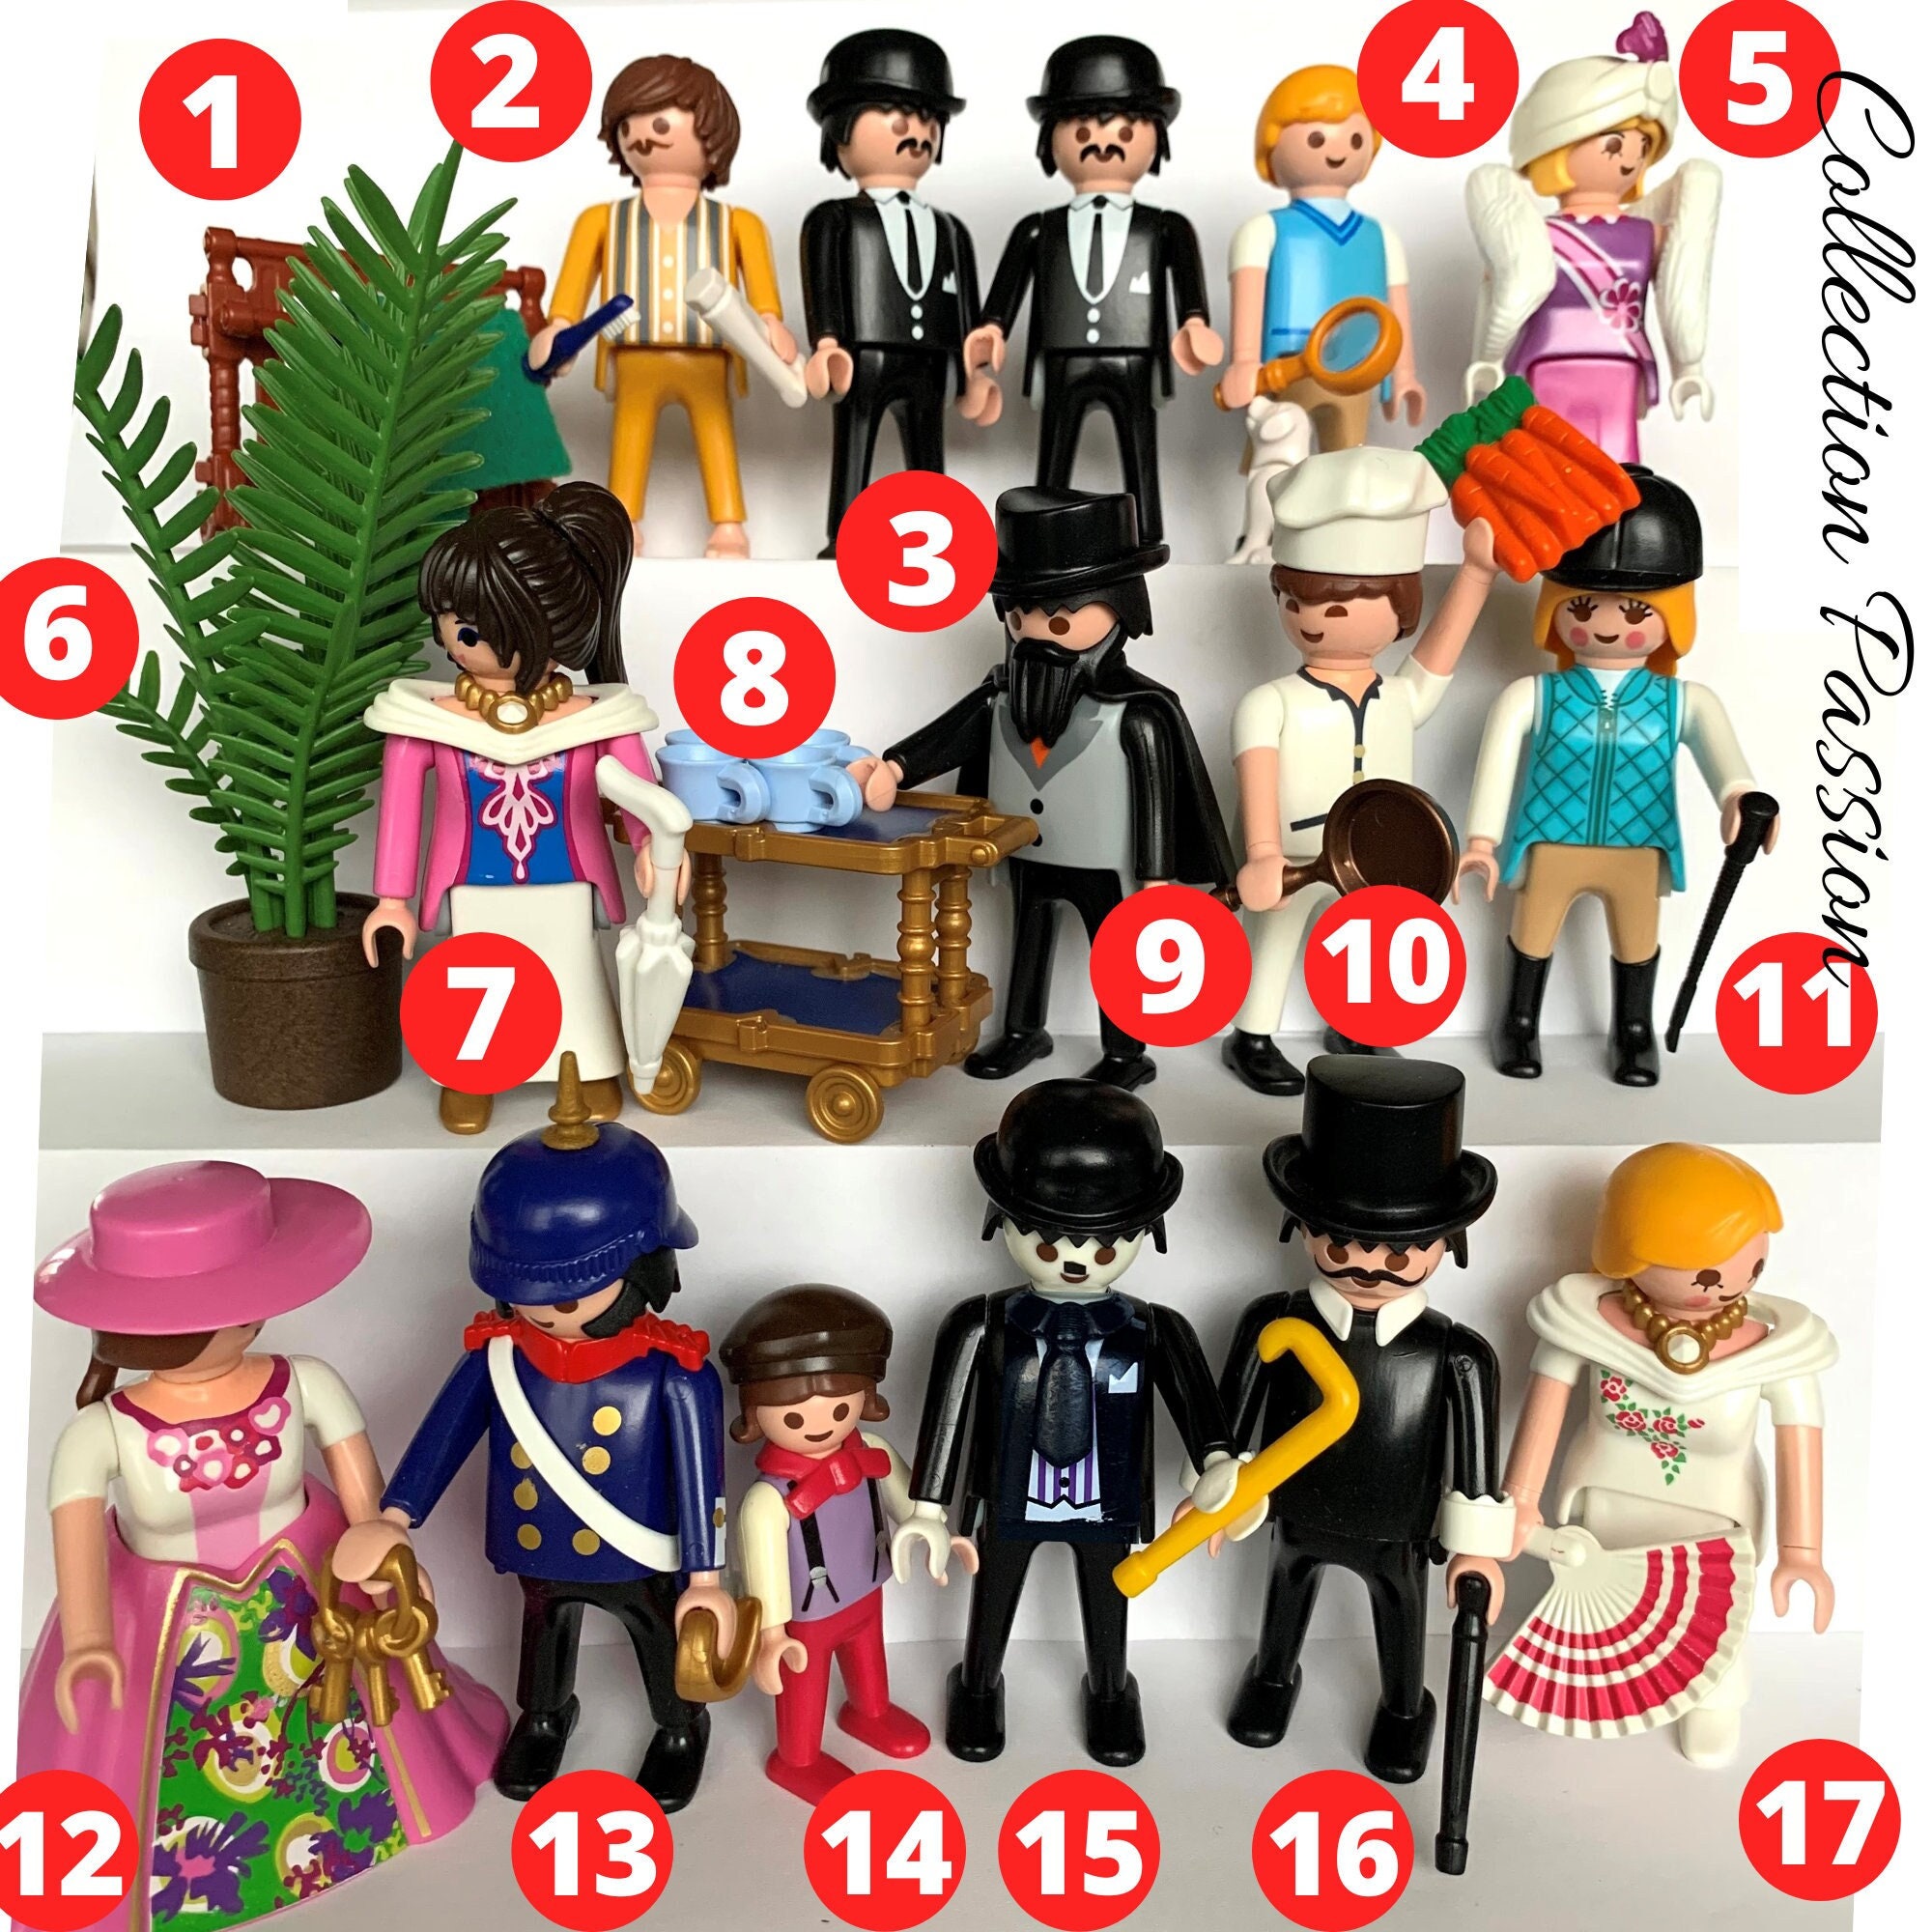 Playmobil Figure 15 Series - Character + Accessories - Model of Choice